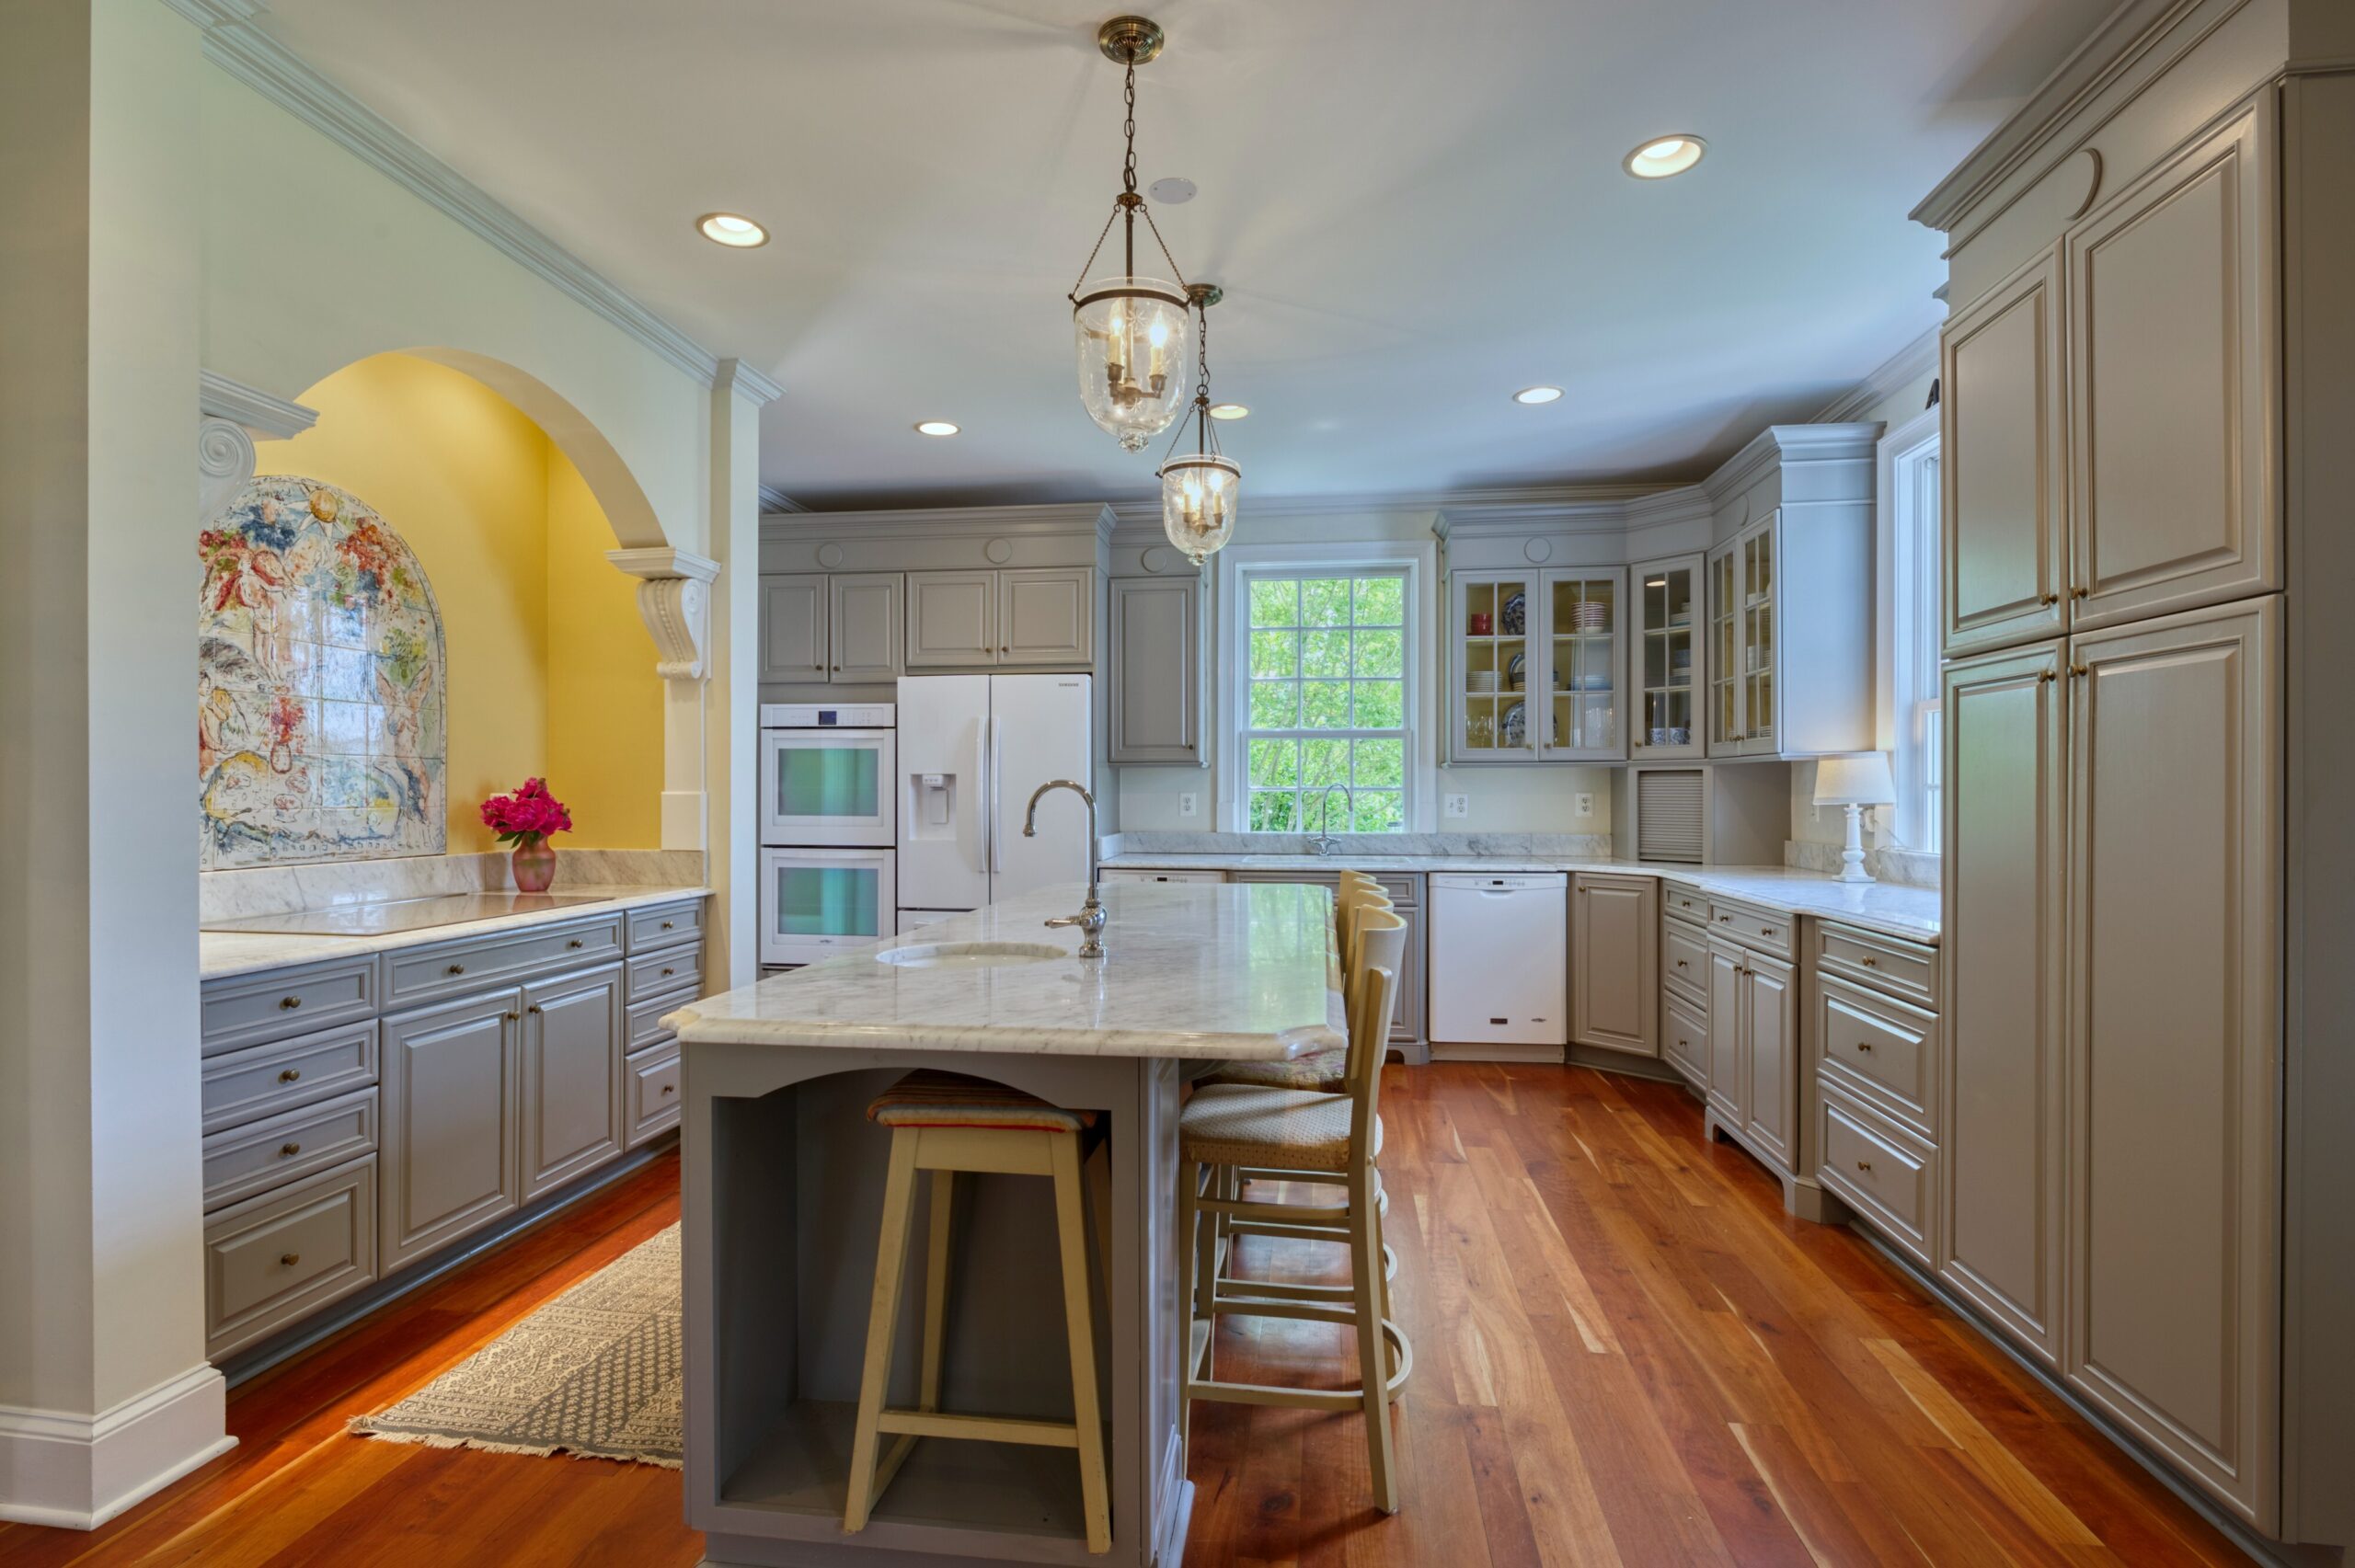 Professional interior photo of 15203 Clover Hill Road - showing the remodeled kitchen with grey cabinets, white granite countertops, white appliances, and large island with sink